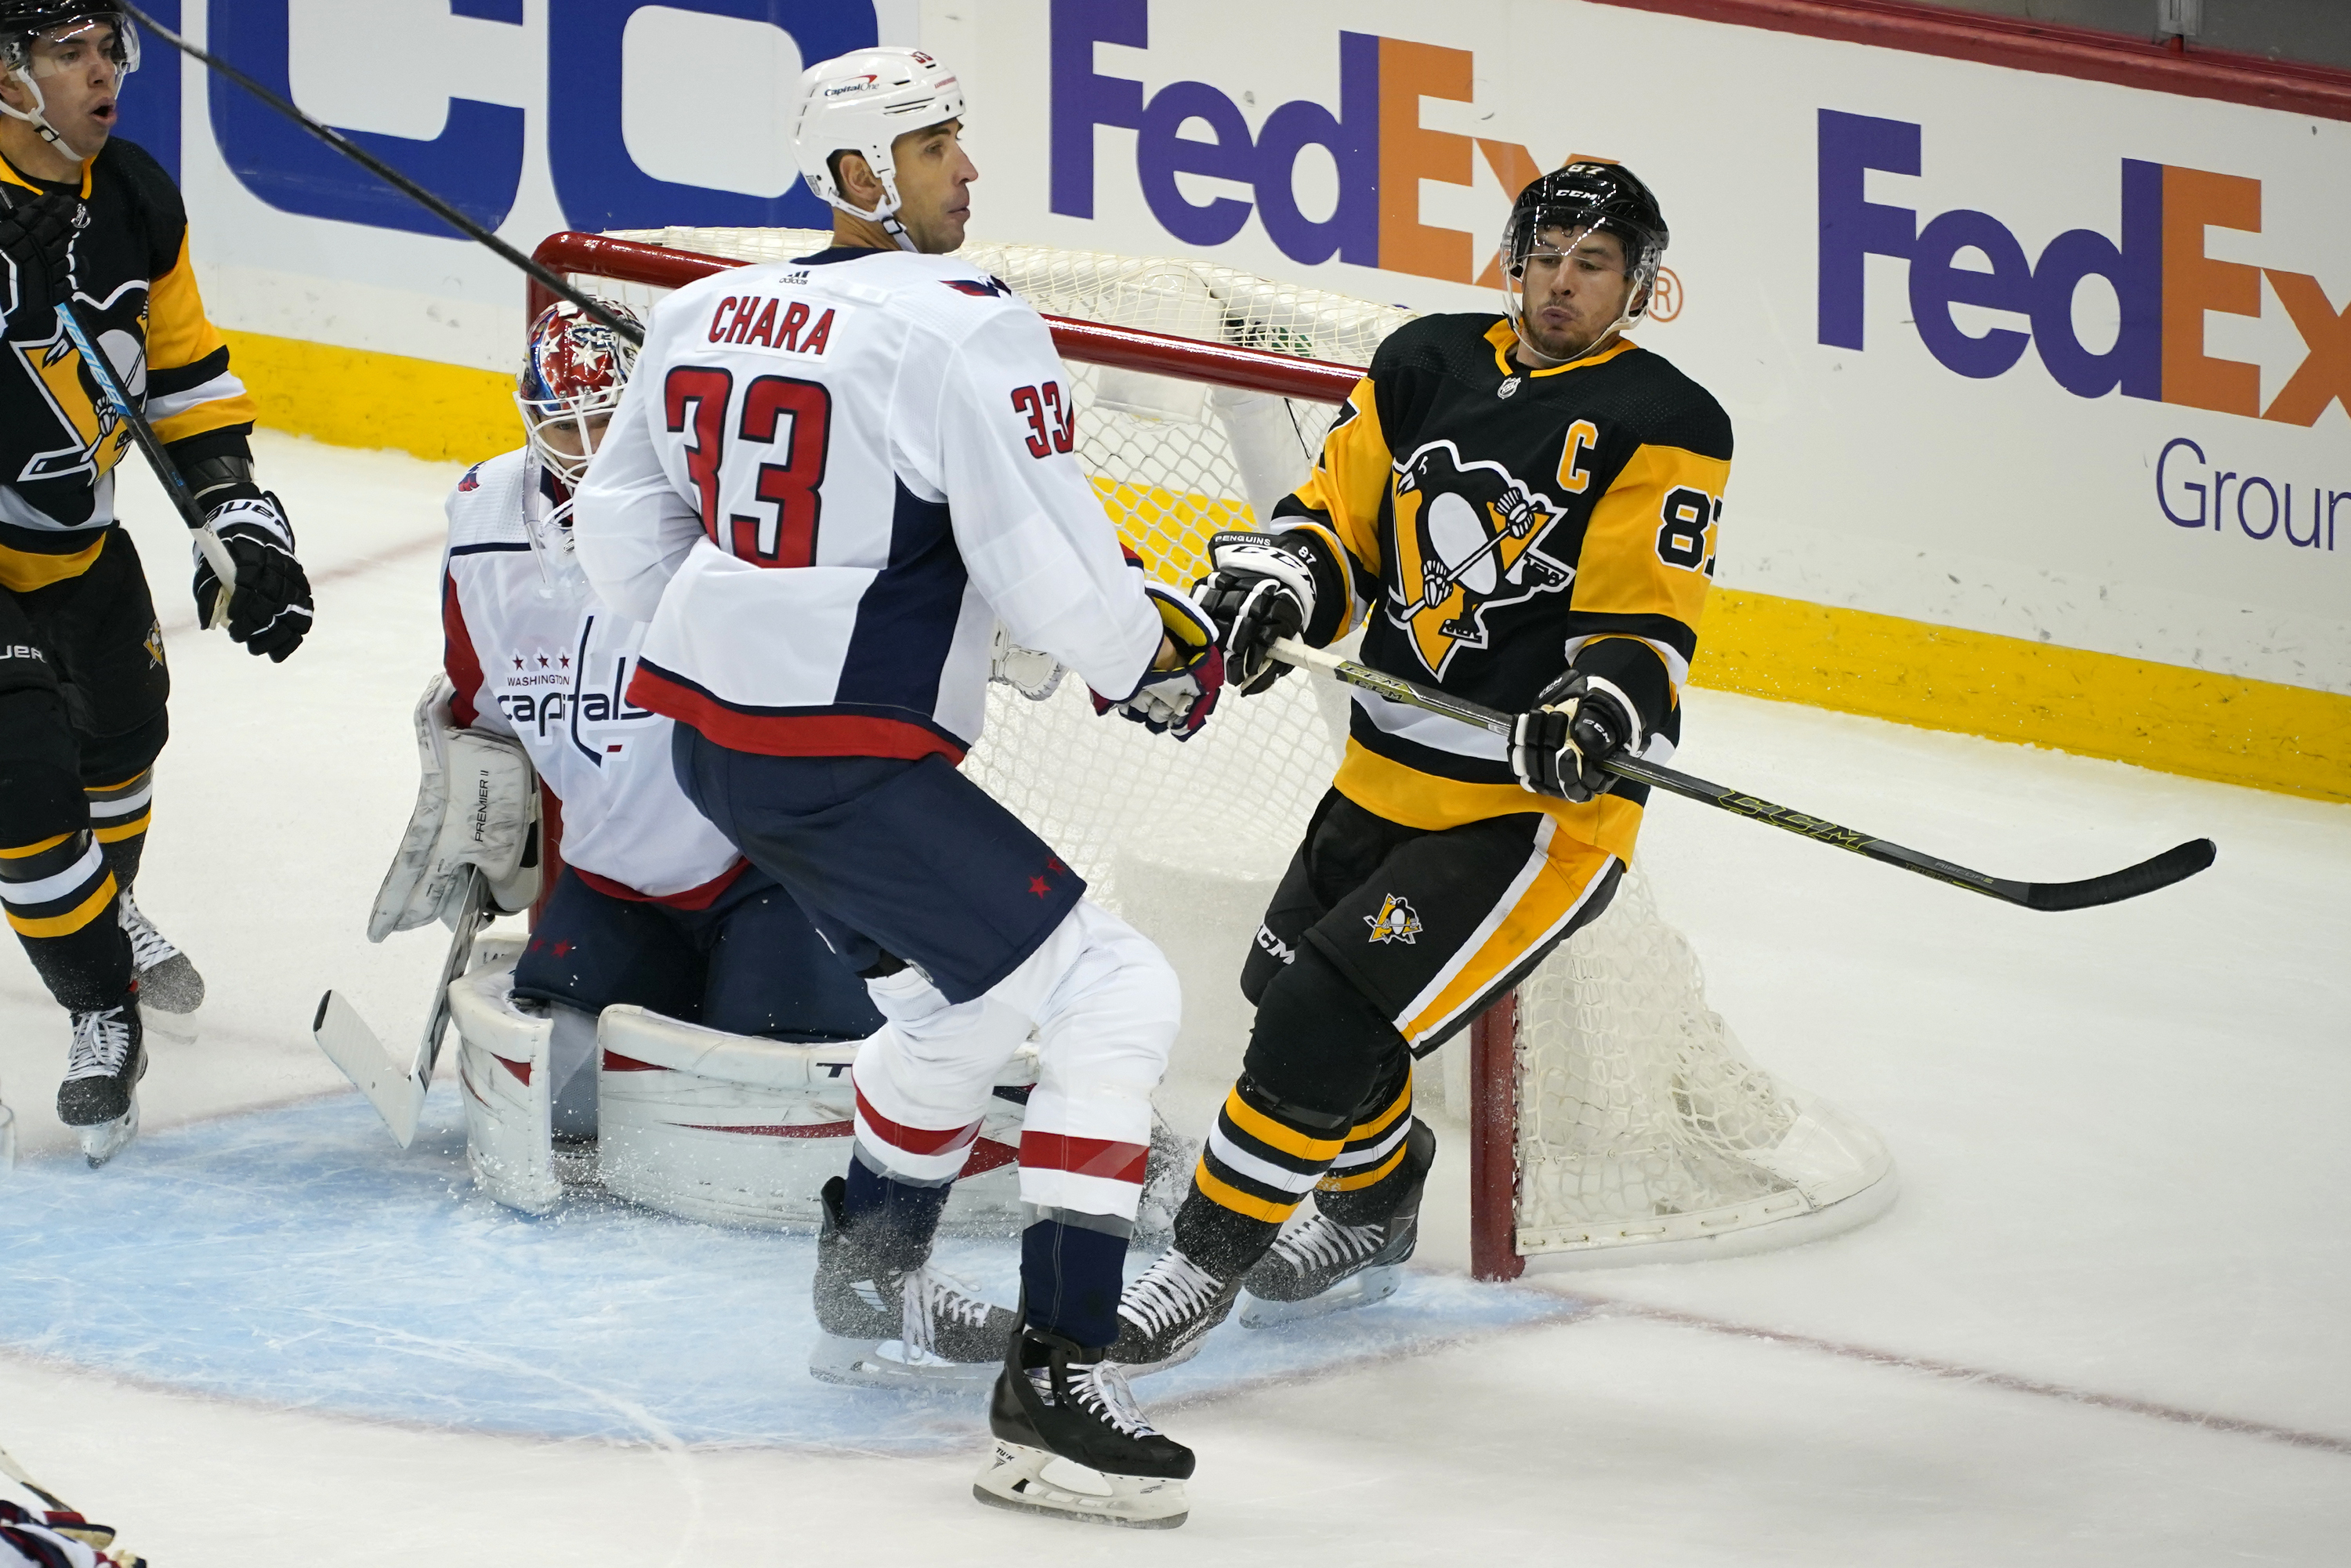 Guentzel's winner lifts Penguins by Capitals 4-3 in shootout